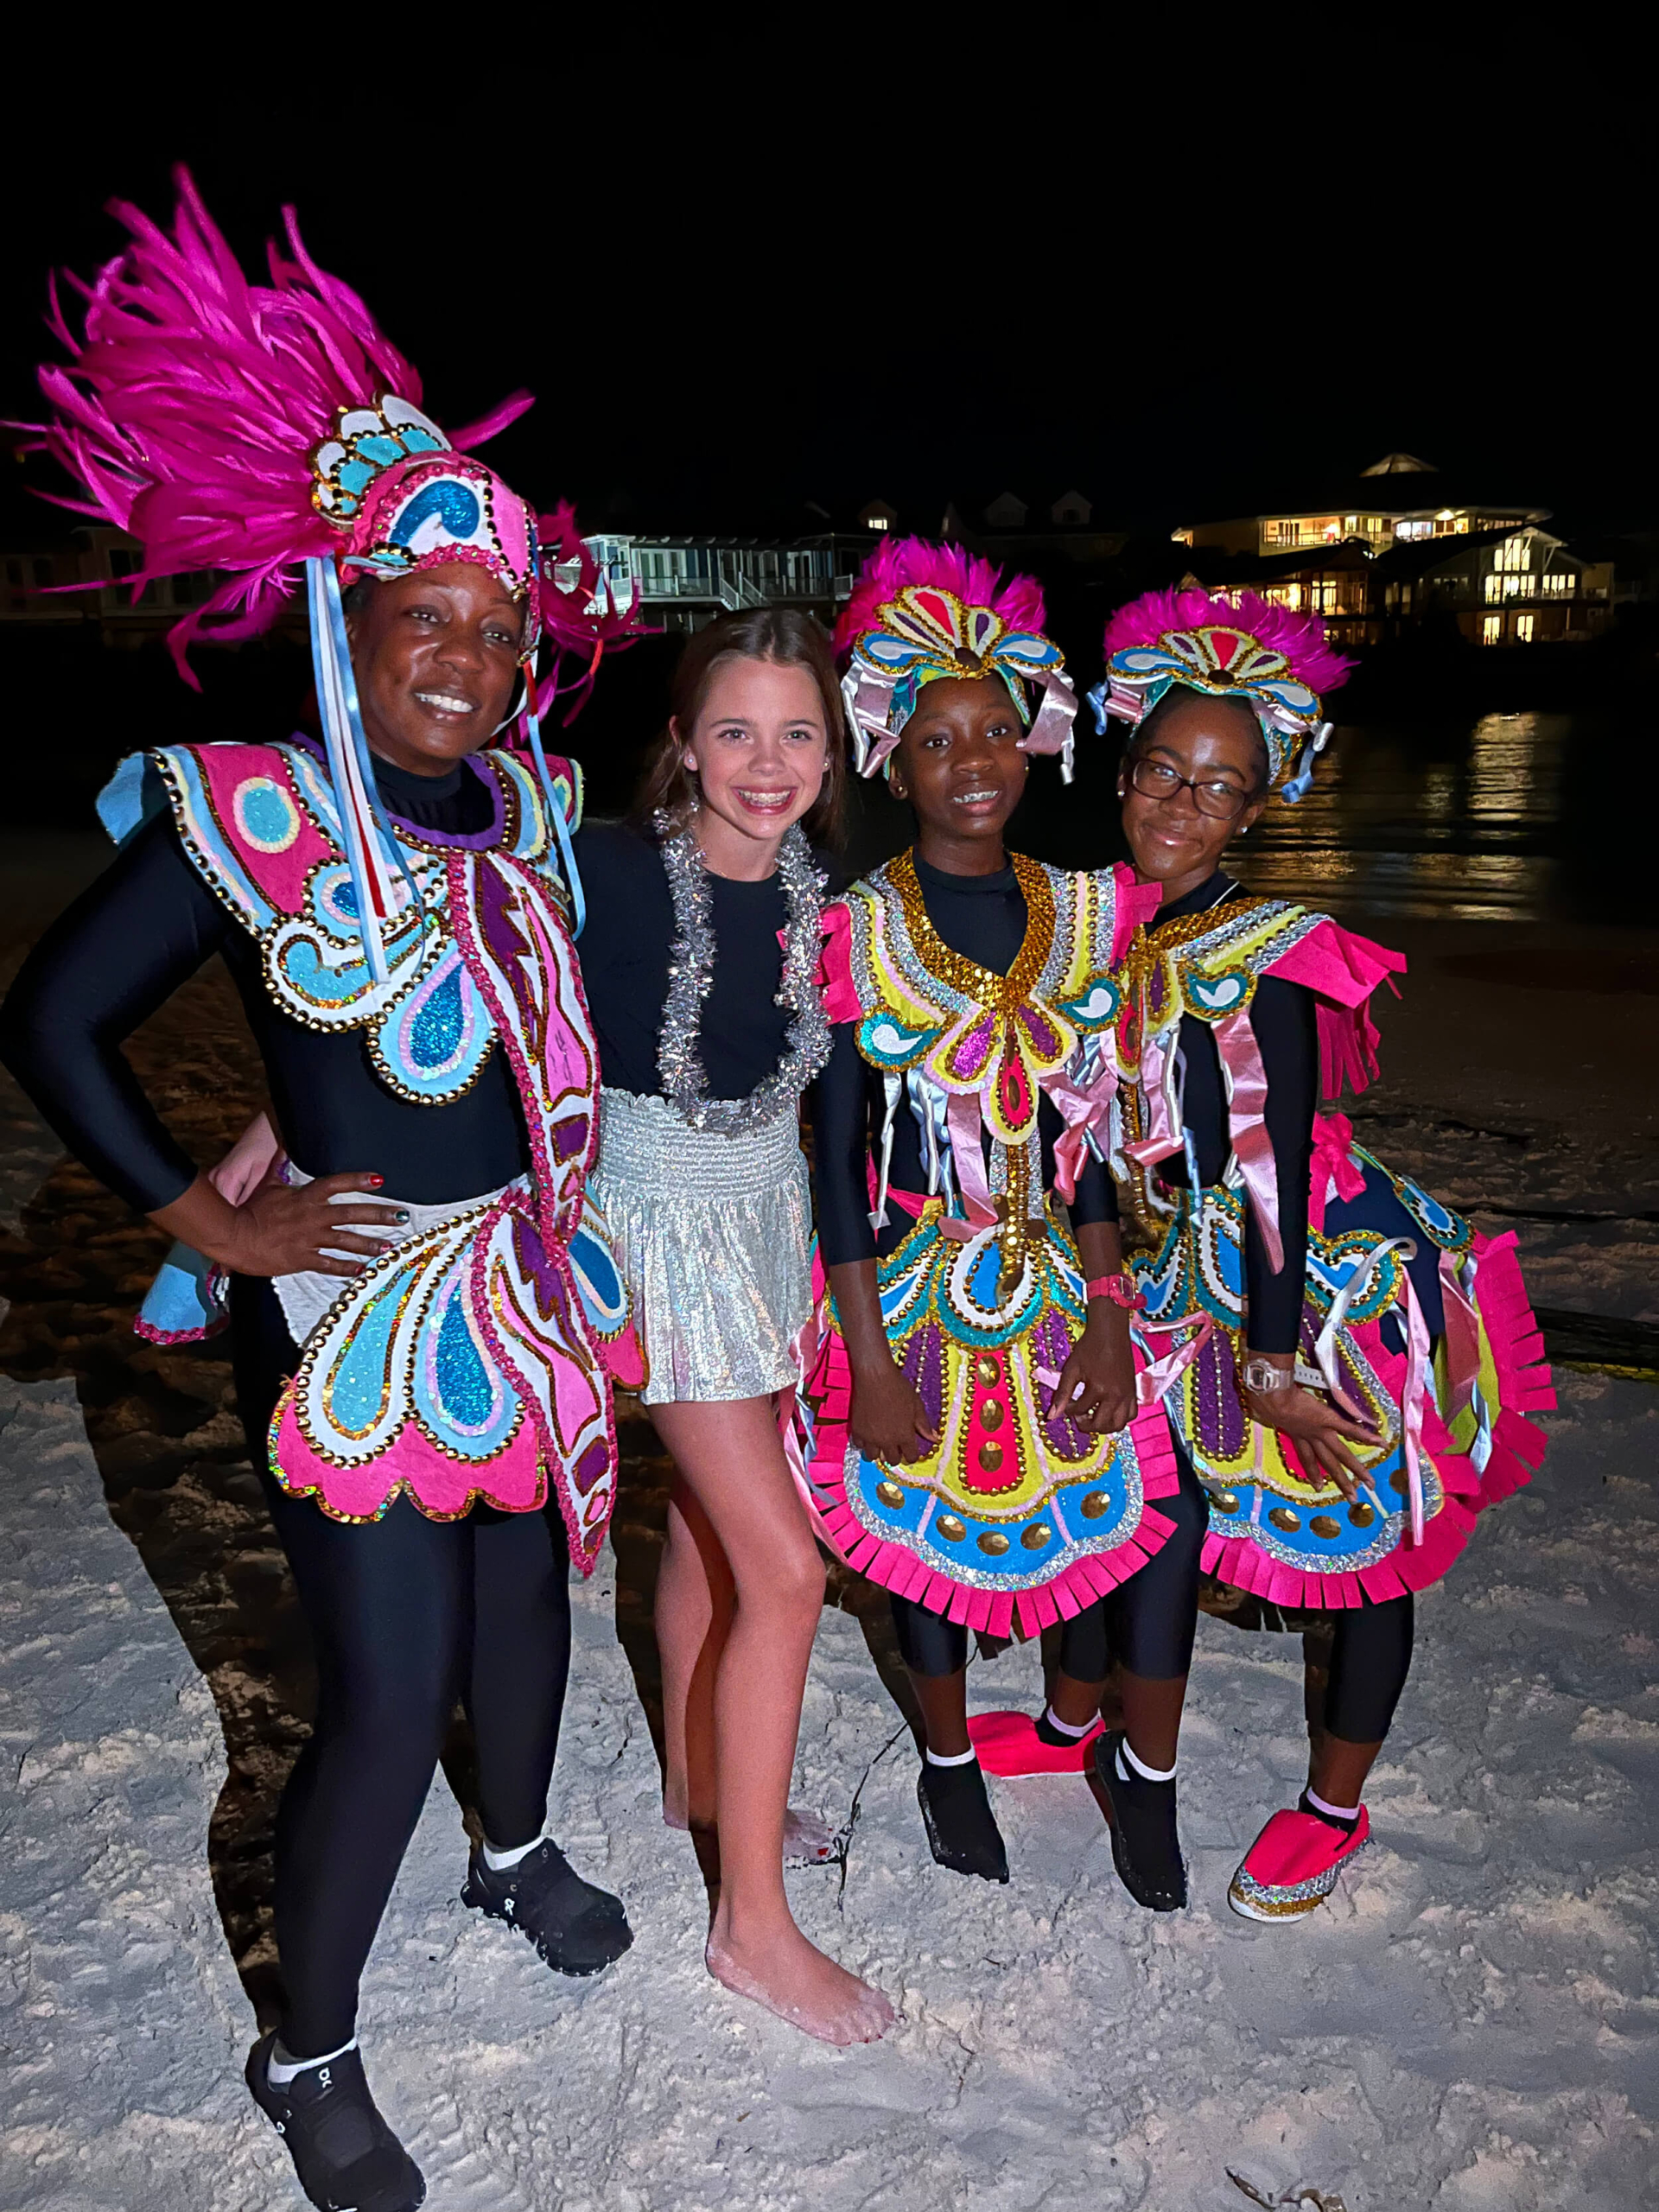 Evening entertainment at The Abaco Club with guests and performers showcasing the rich club lifestyle and coastal living